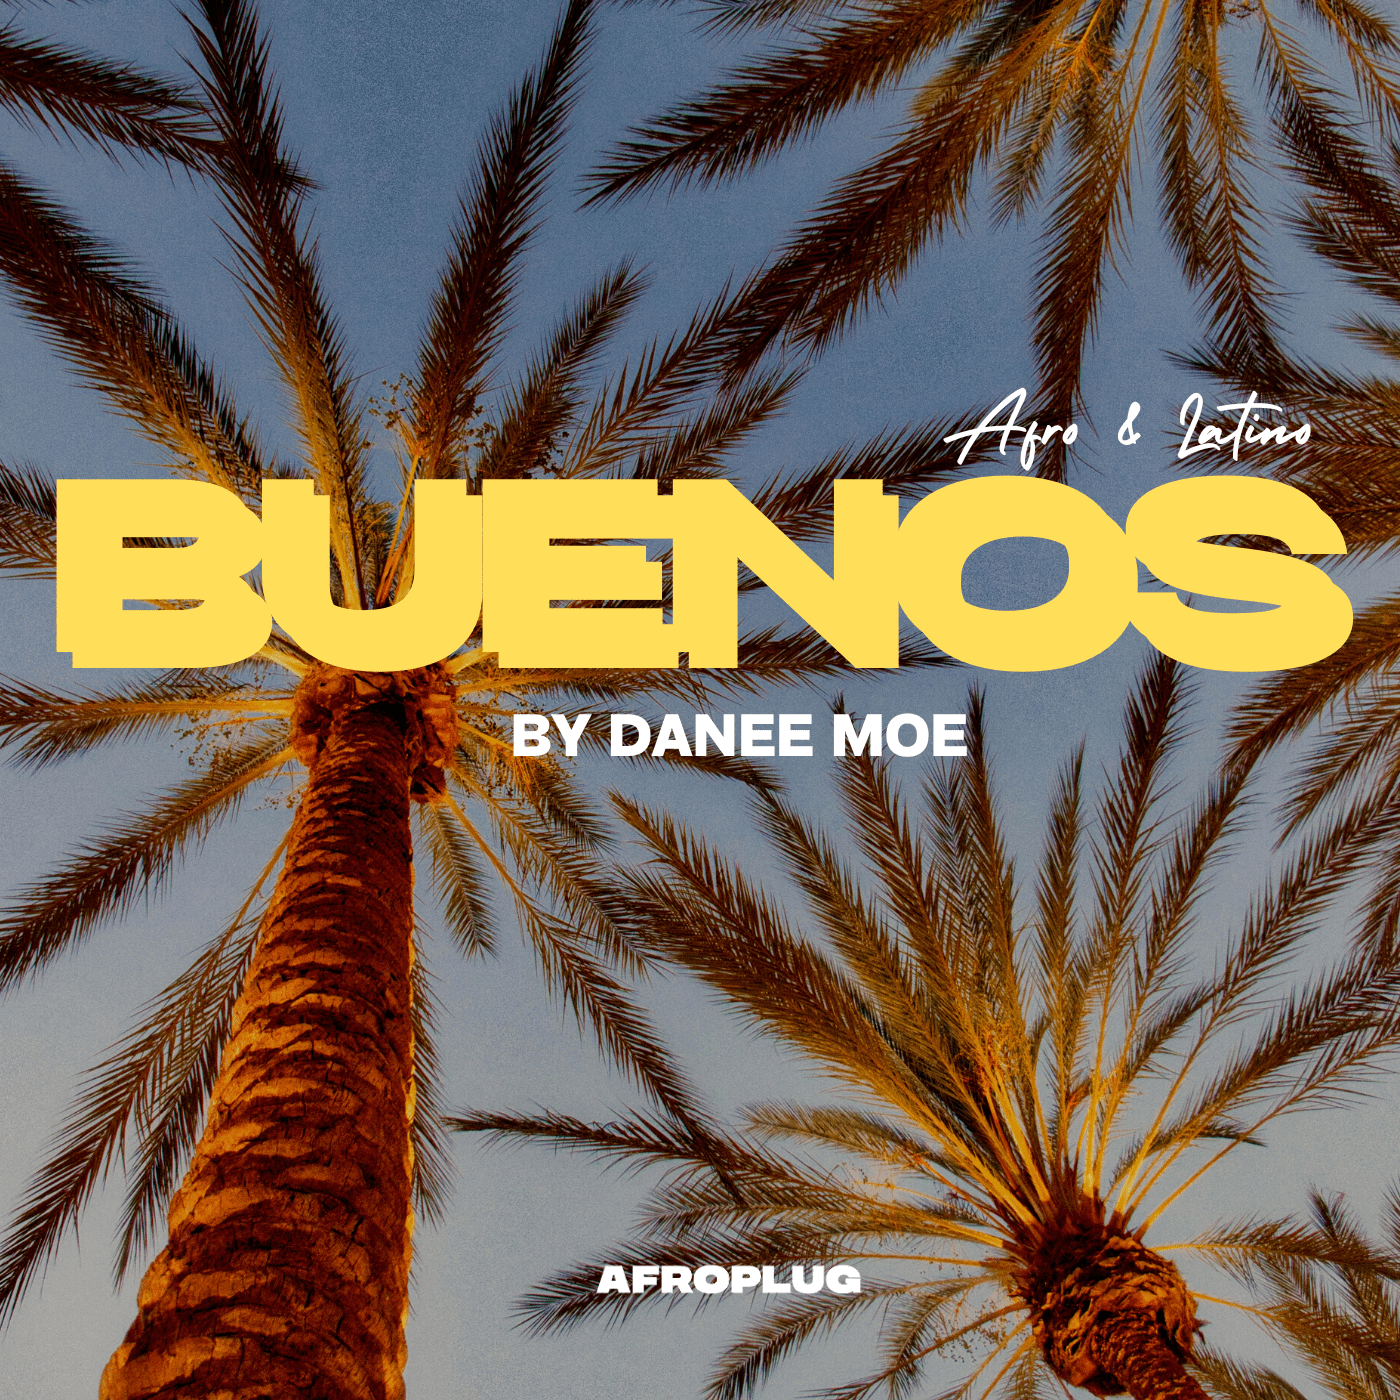 Buenos - Afro Latin Sounds - 130+ Loops & Samples